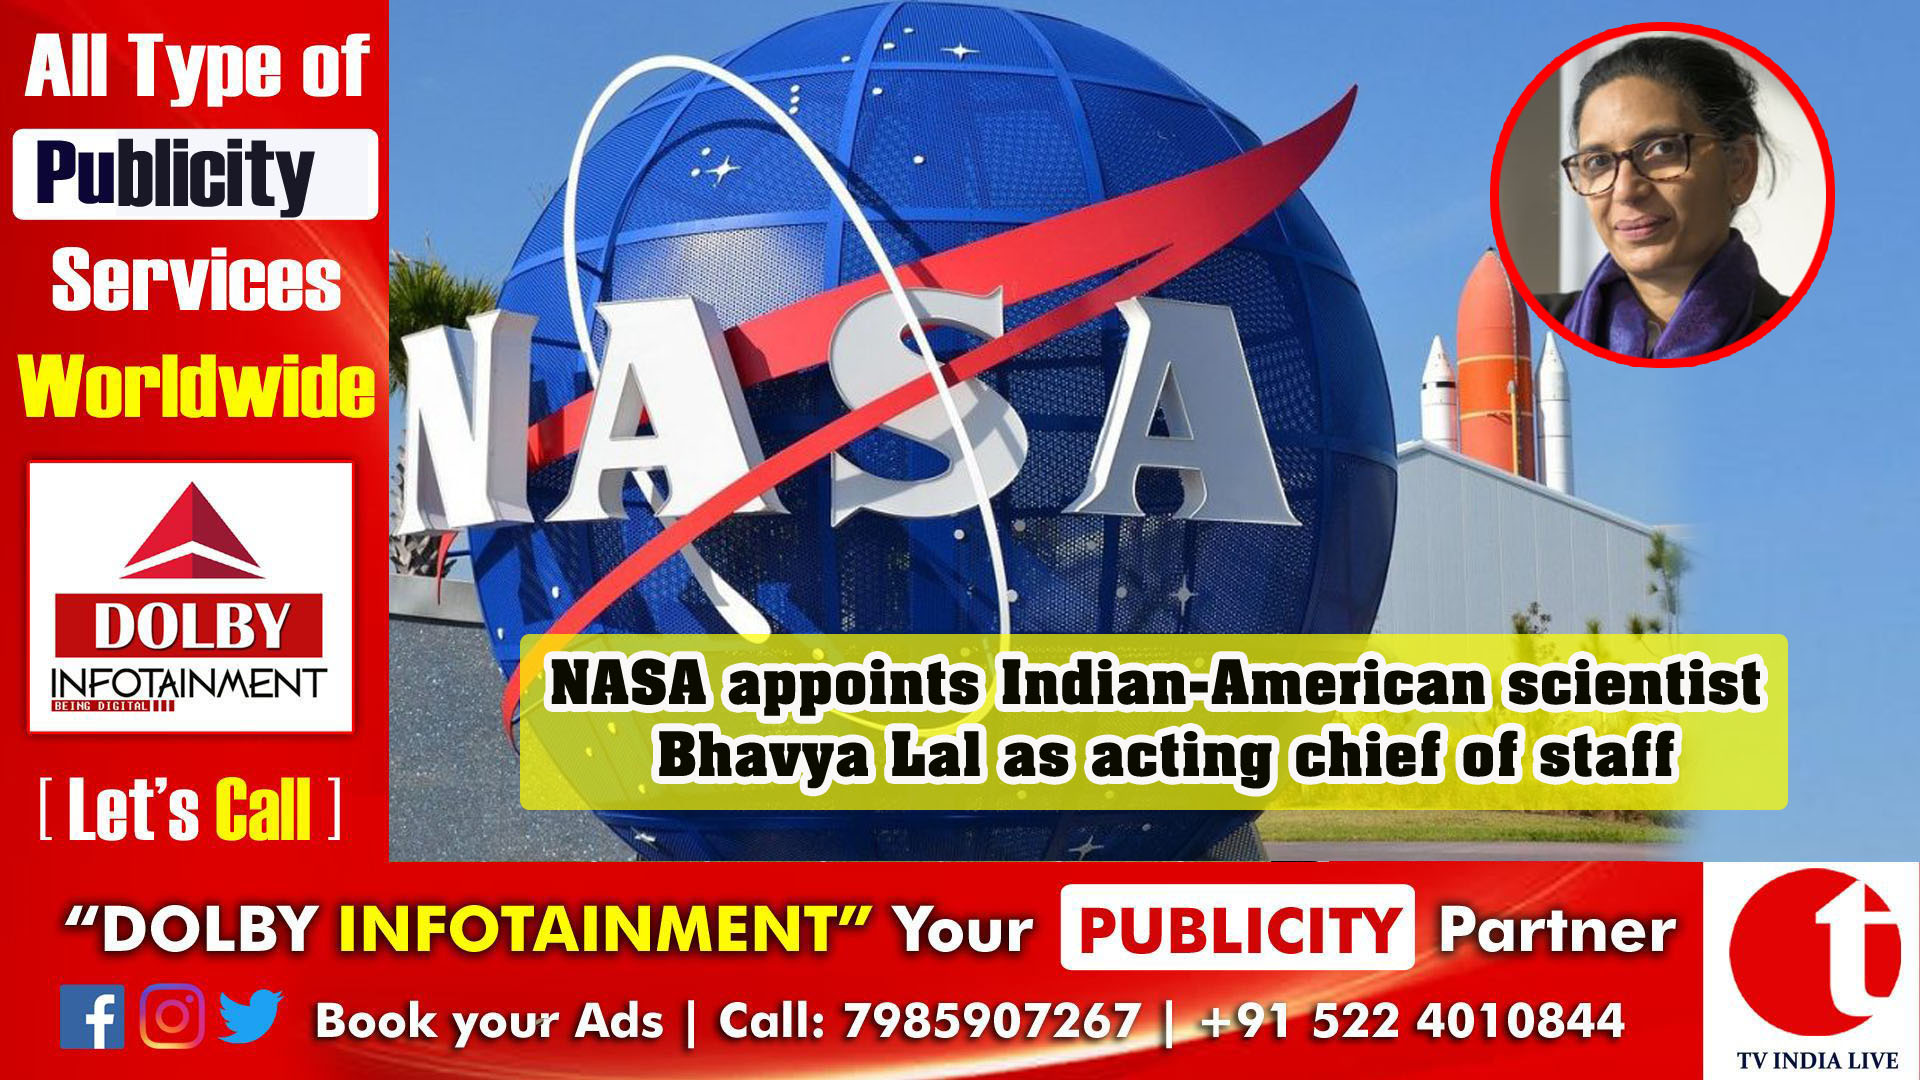 NASA appoints Indian-American scientist Bhavya Lal as acting chief of staff